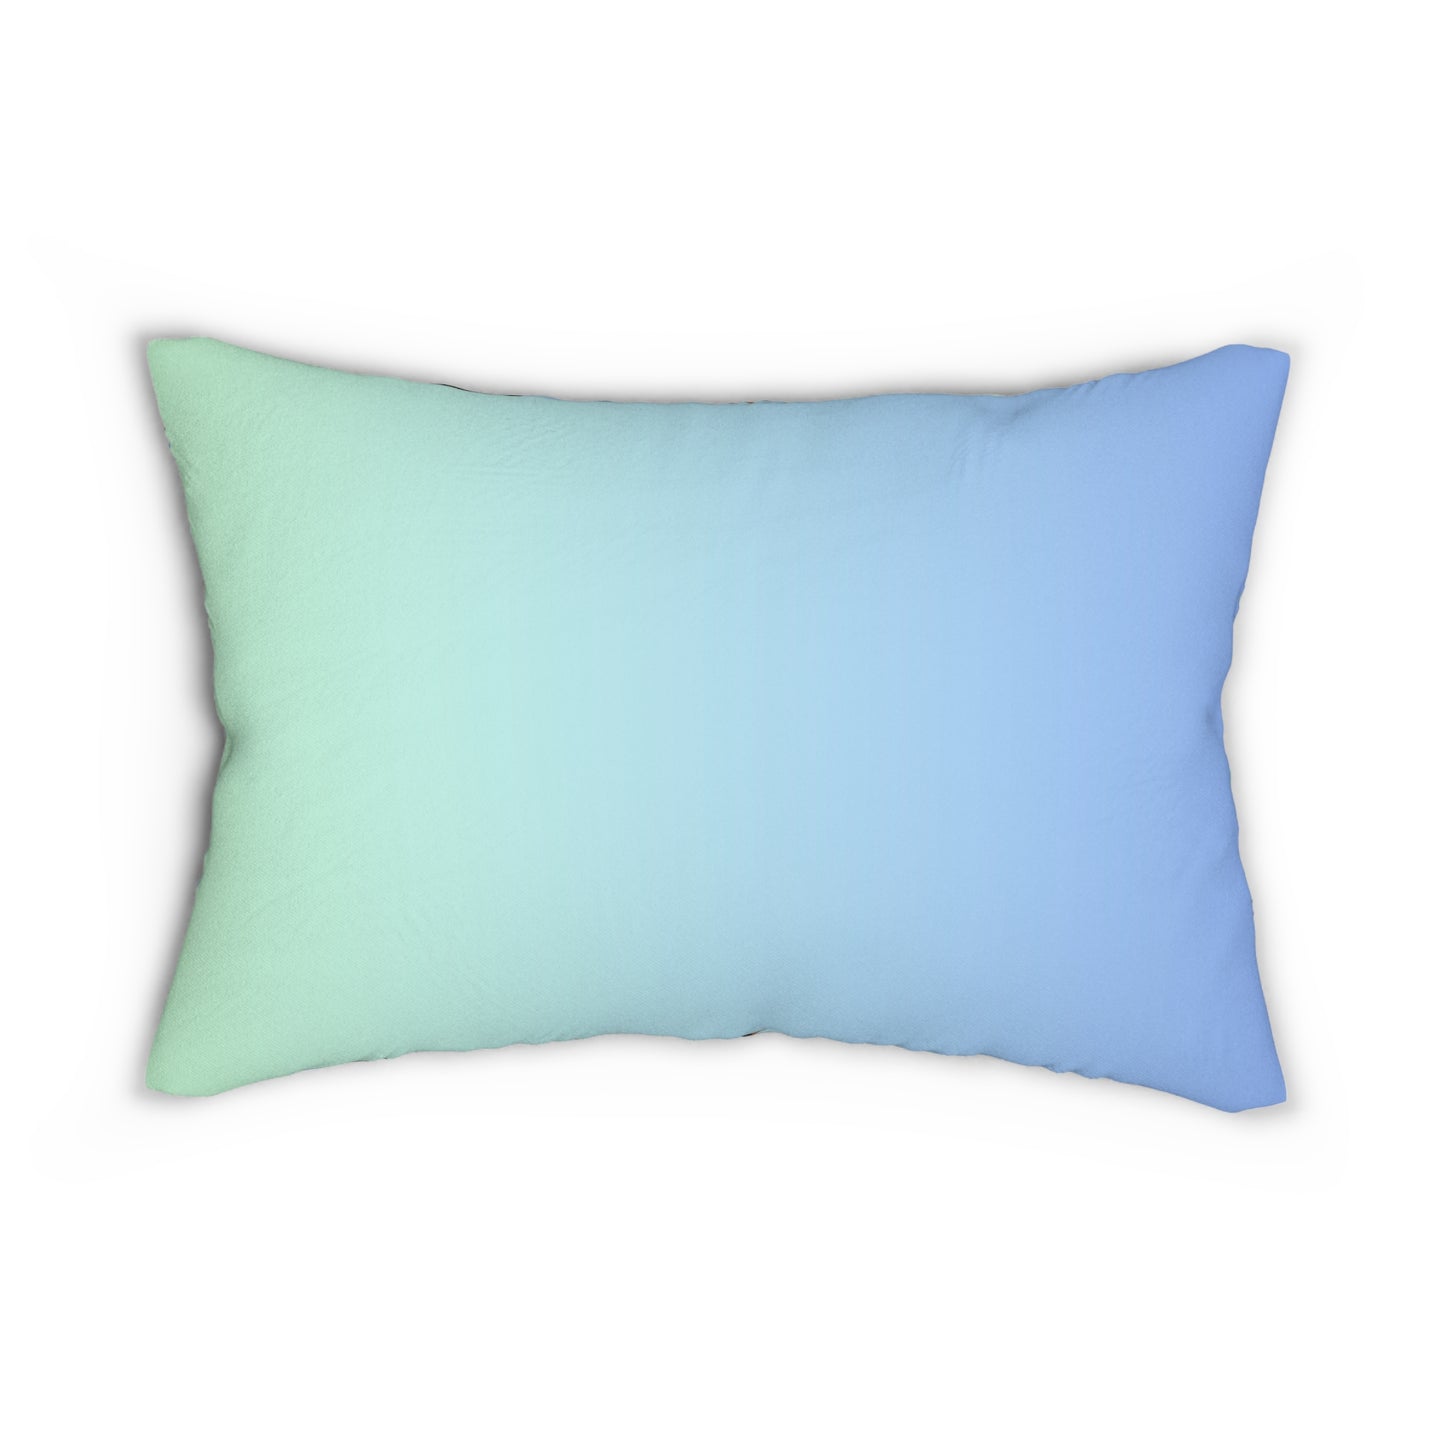 Animal Print (Dual) - Blue-Green Ombre Accent Pillow